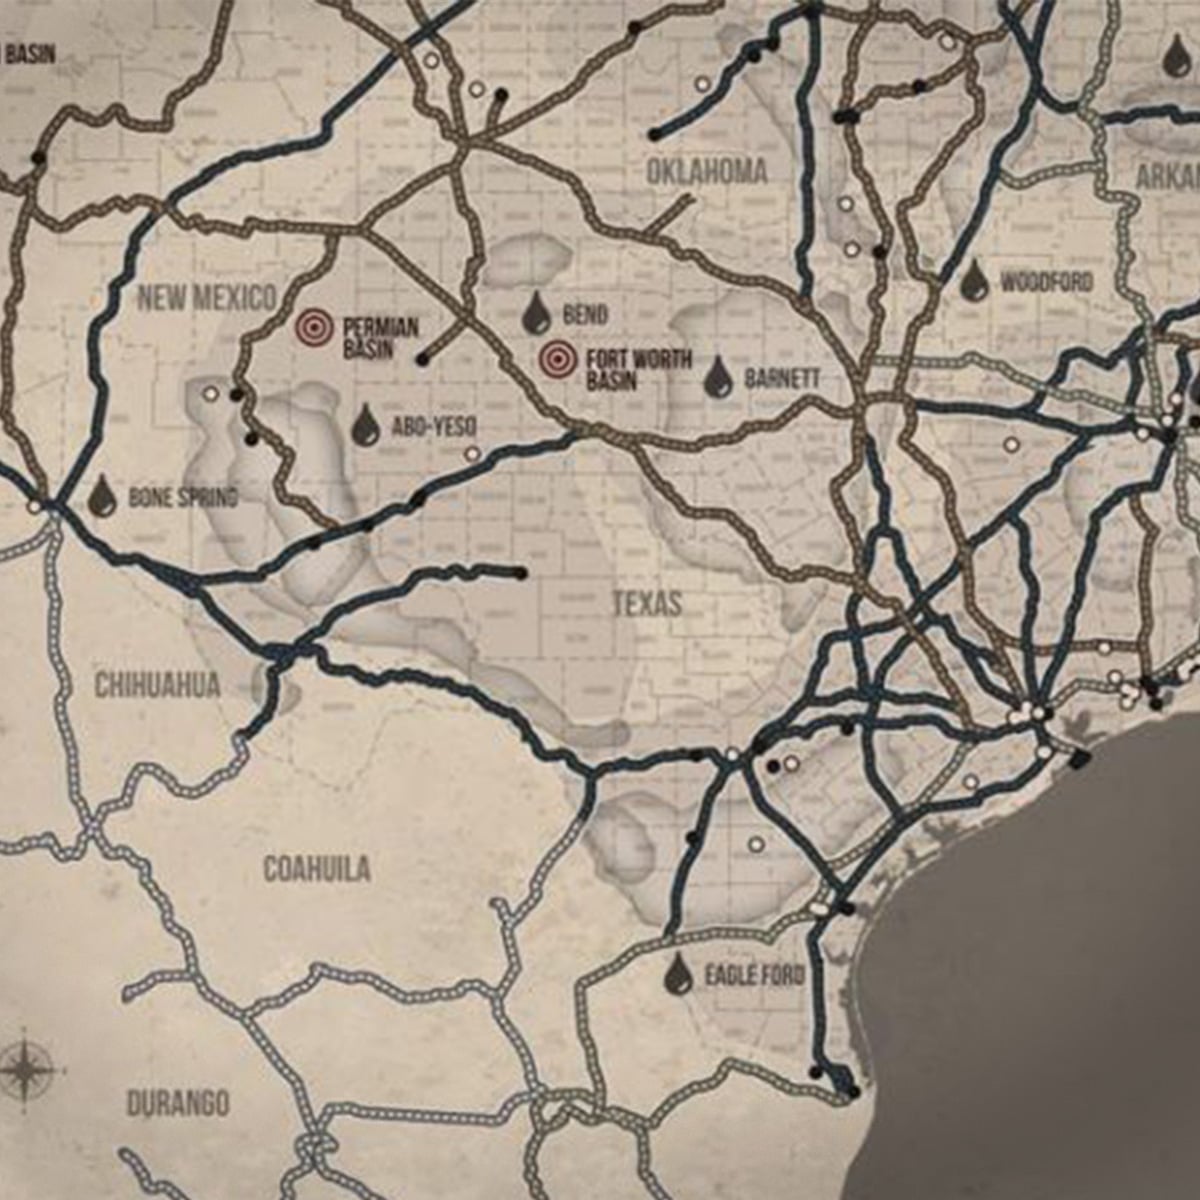 Texas Railroad Map & Oil Plays Map